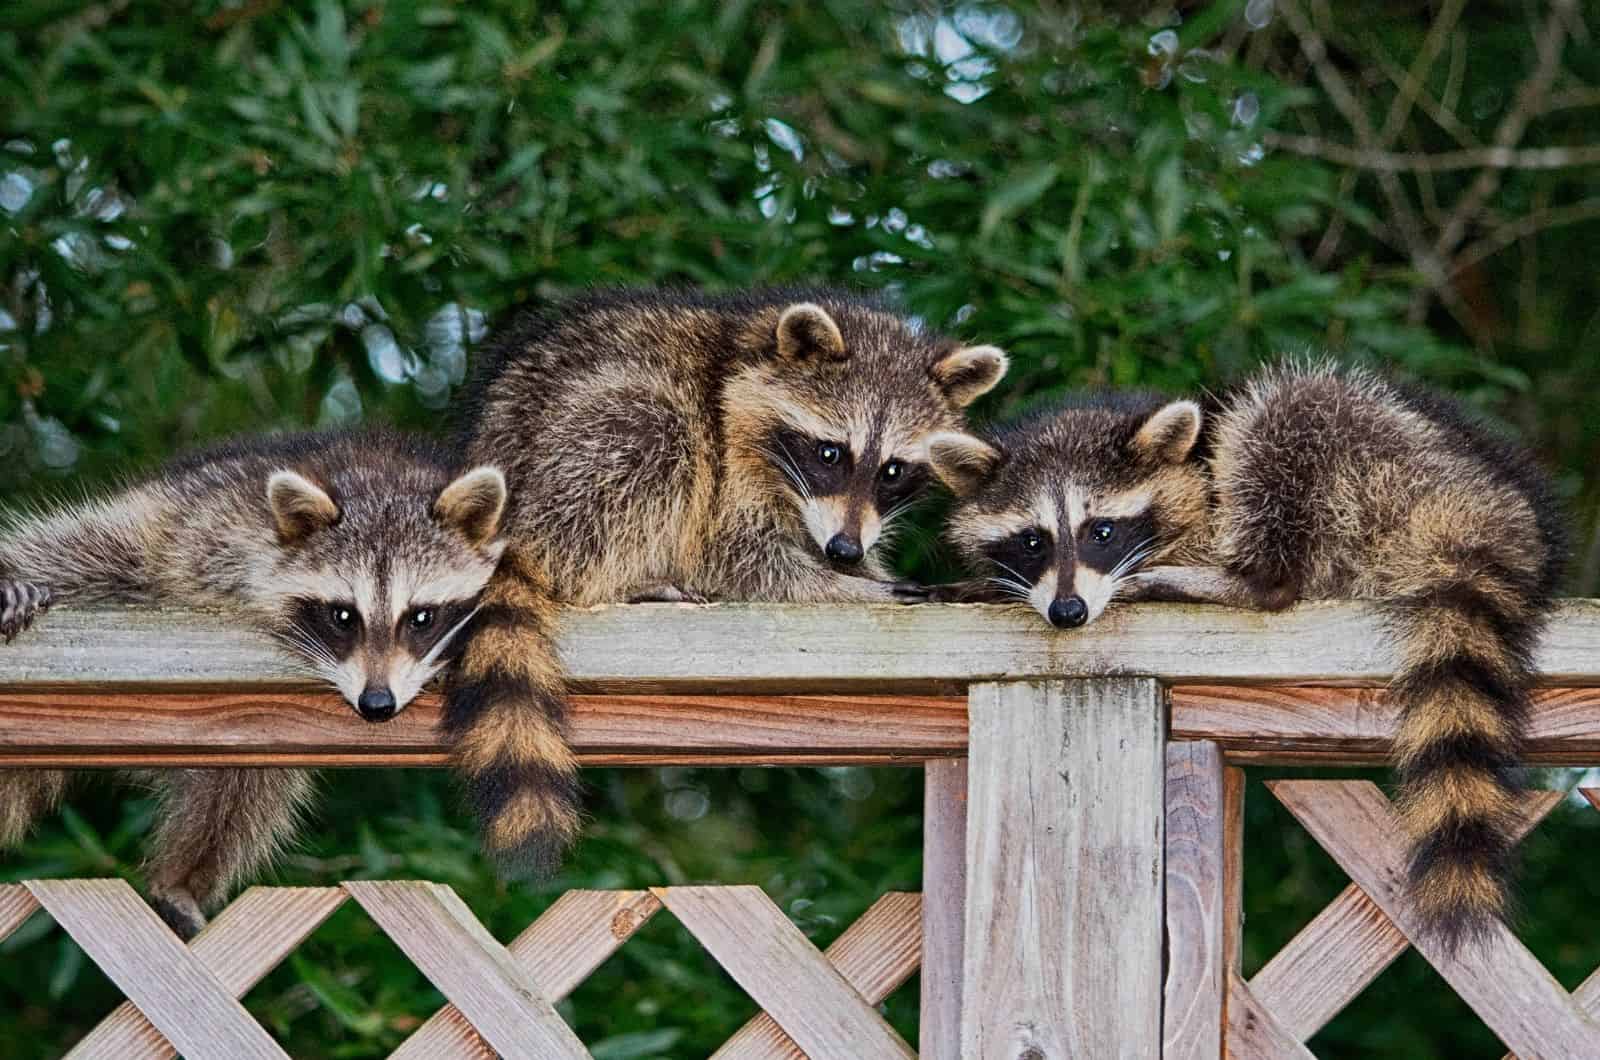 How To Deter Raccoons And Keep Them Away From The Yard